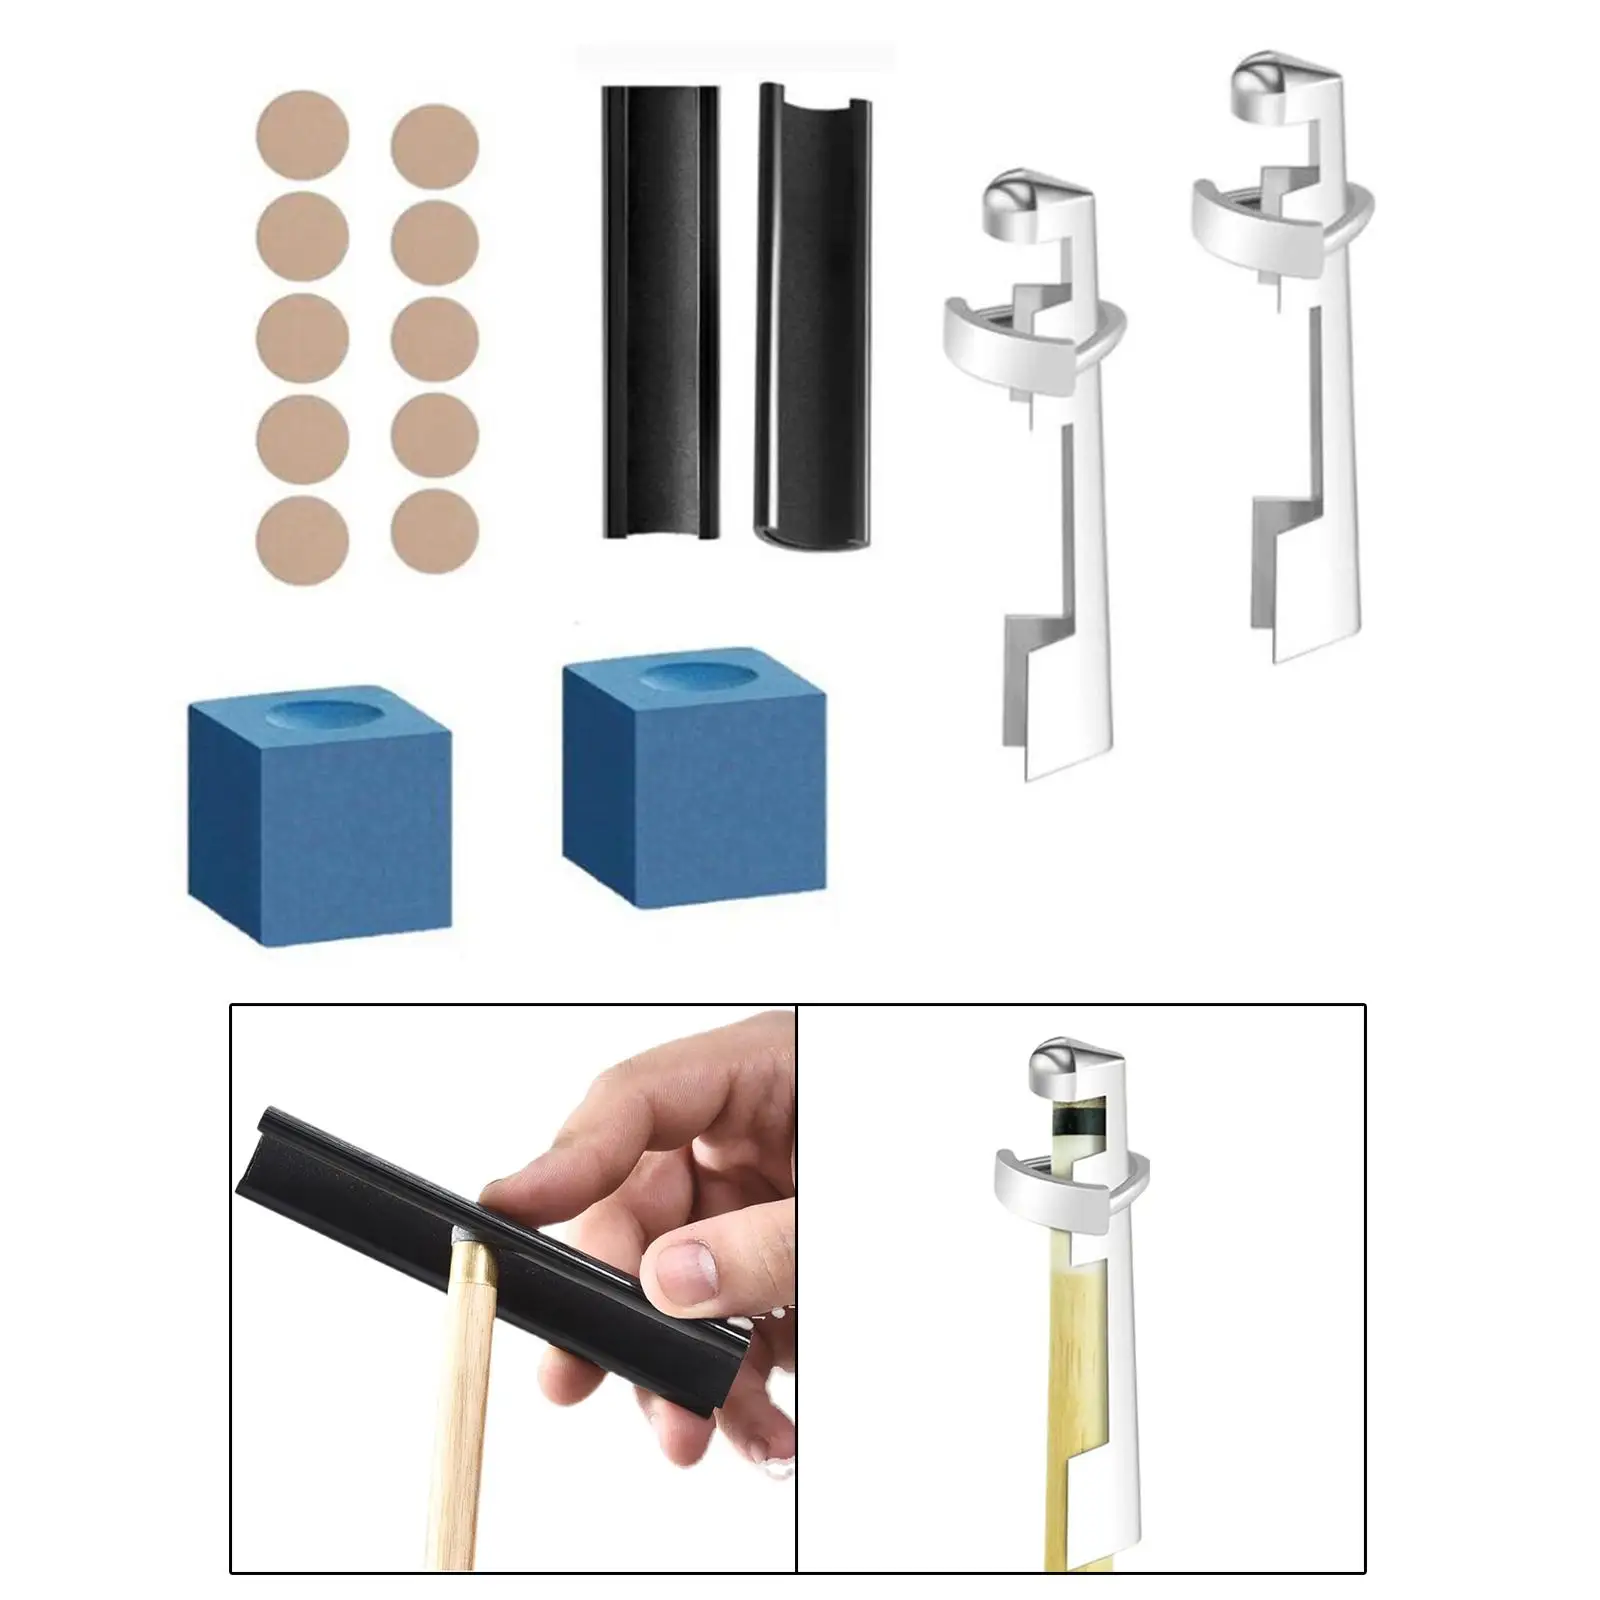 16Pcs Pool Snooker Cue Tip Repair Set with Tip Clamp Accessories Cue Tipping